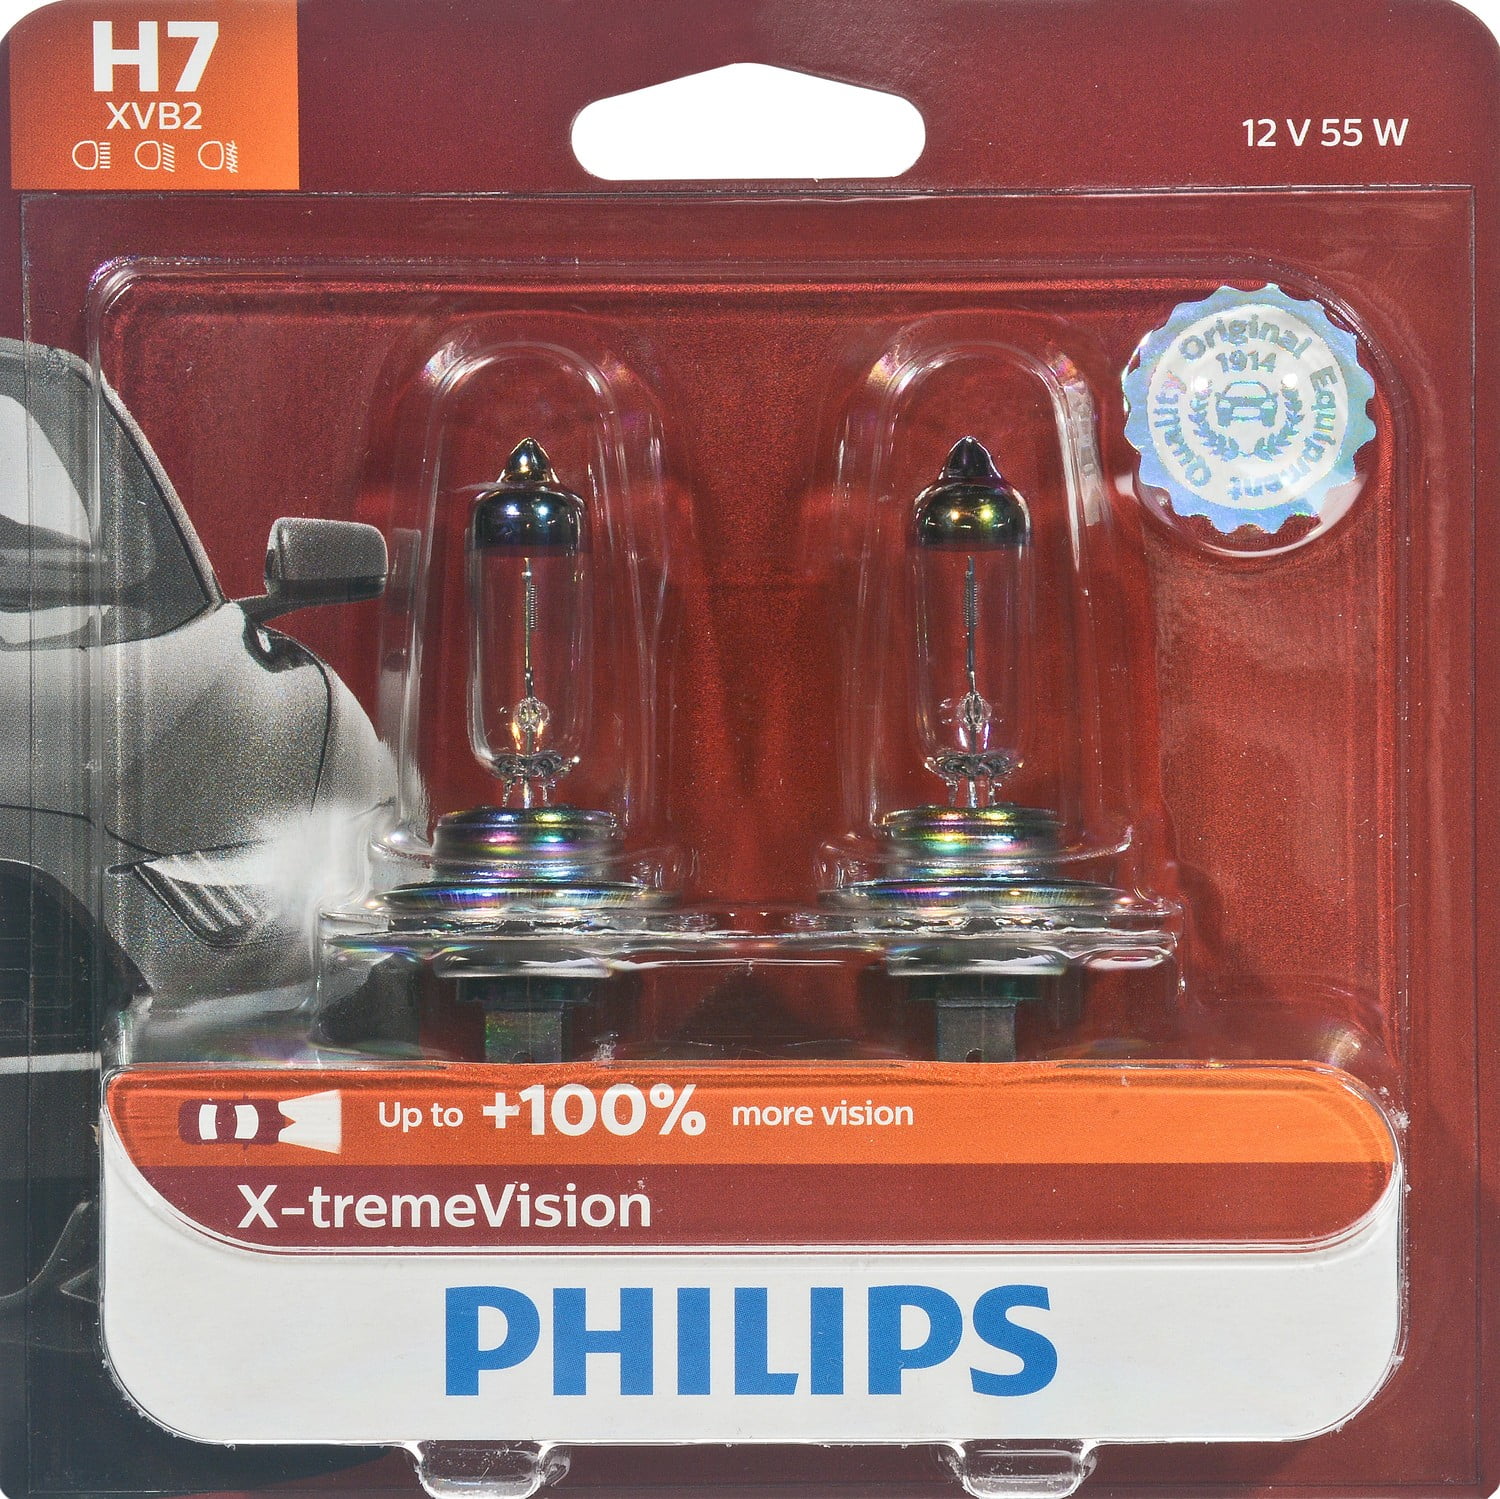  Philips H7 X-tremeVision Upgrade Headlight Bulb with